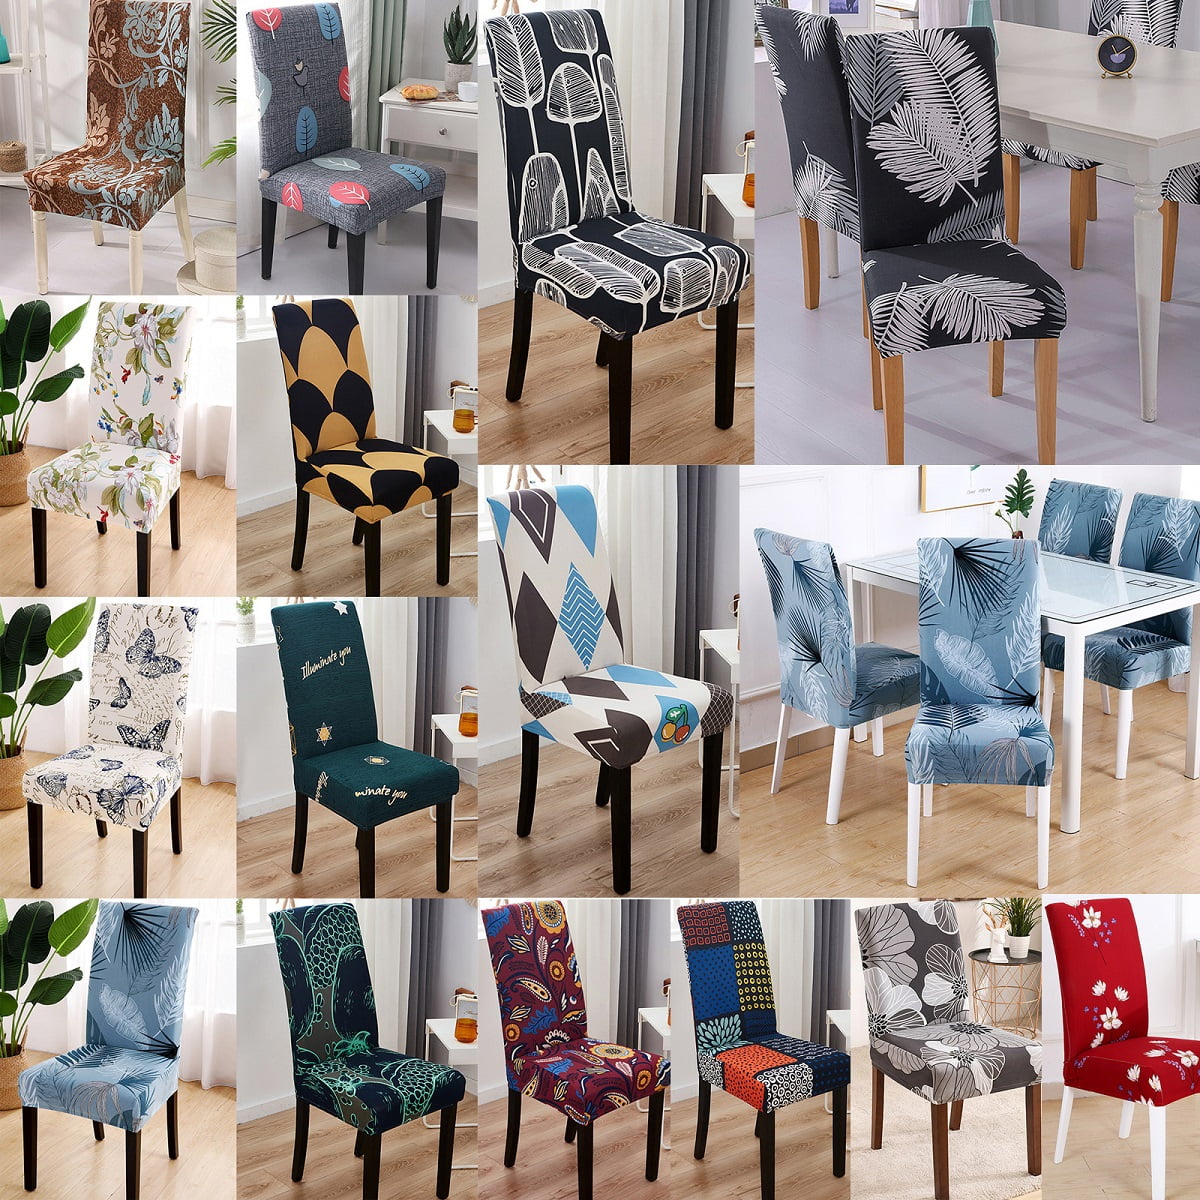 Stretch Dining Chair Covers Slipcovers Removable Banquet Protective Cover Decor 